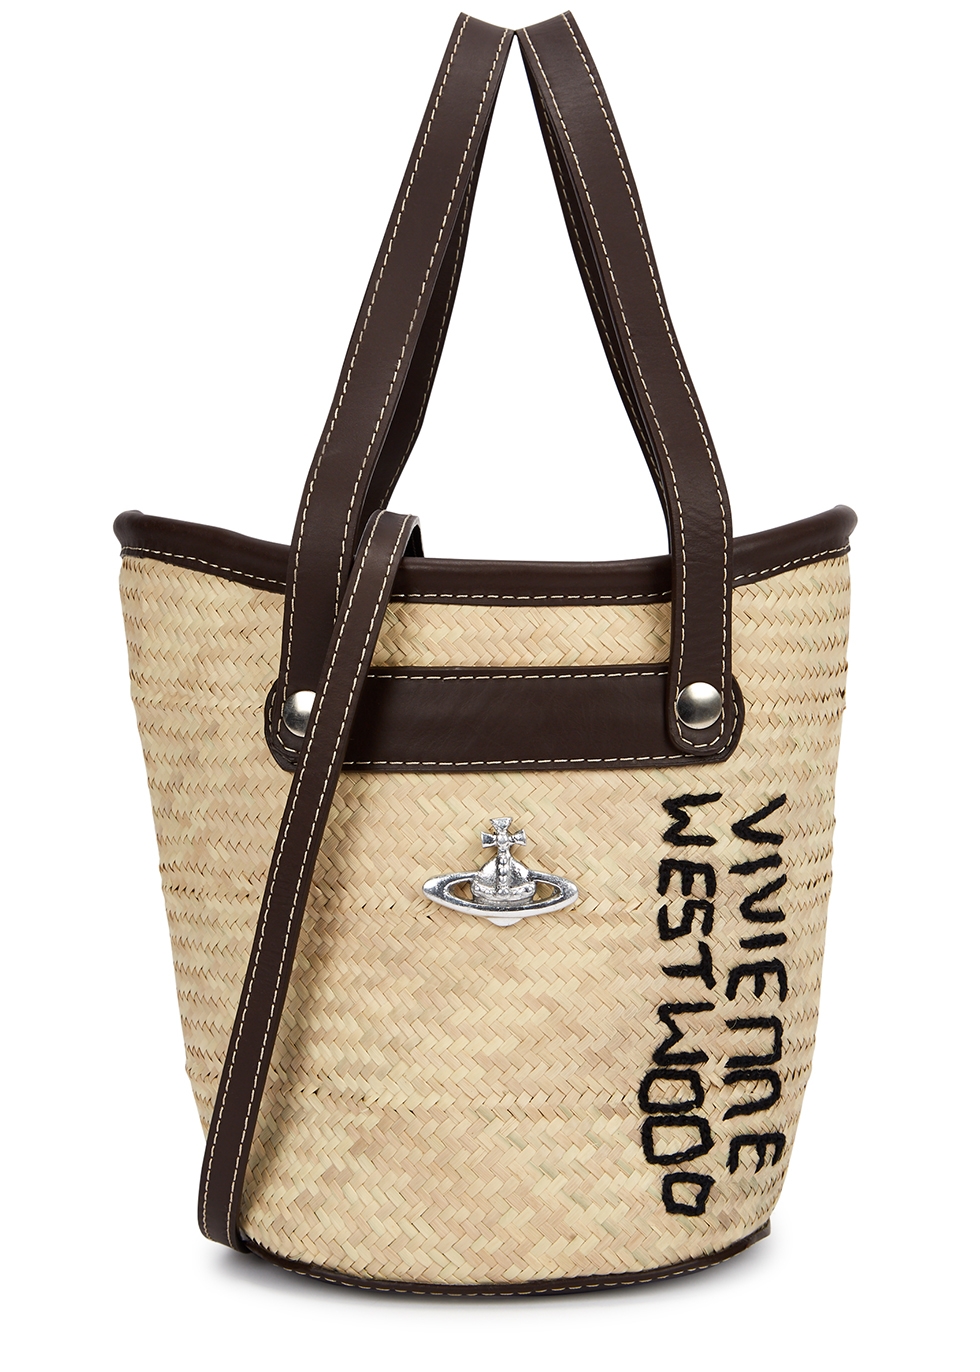 VIVIENNE WESTWOOD Bags for Women | ModeSens